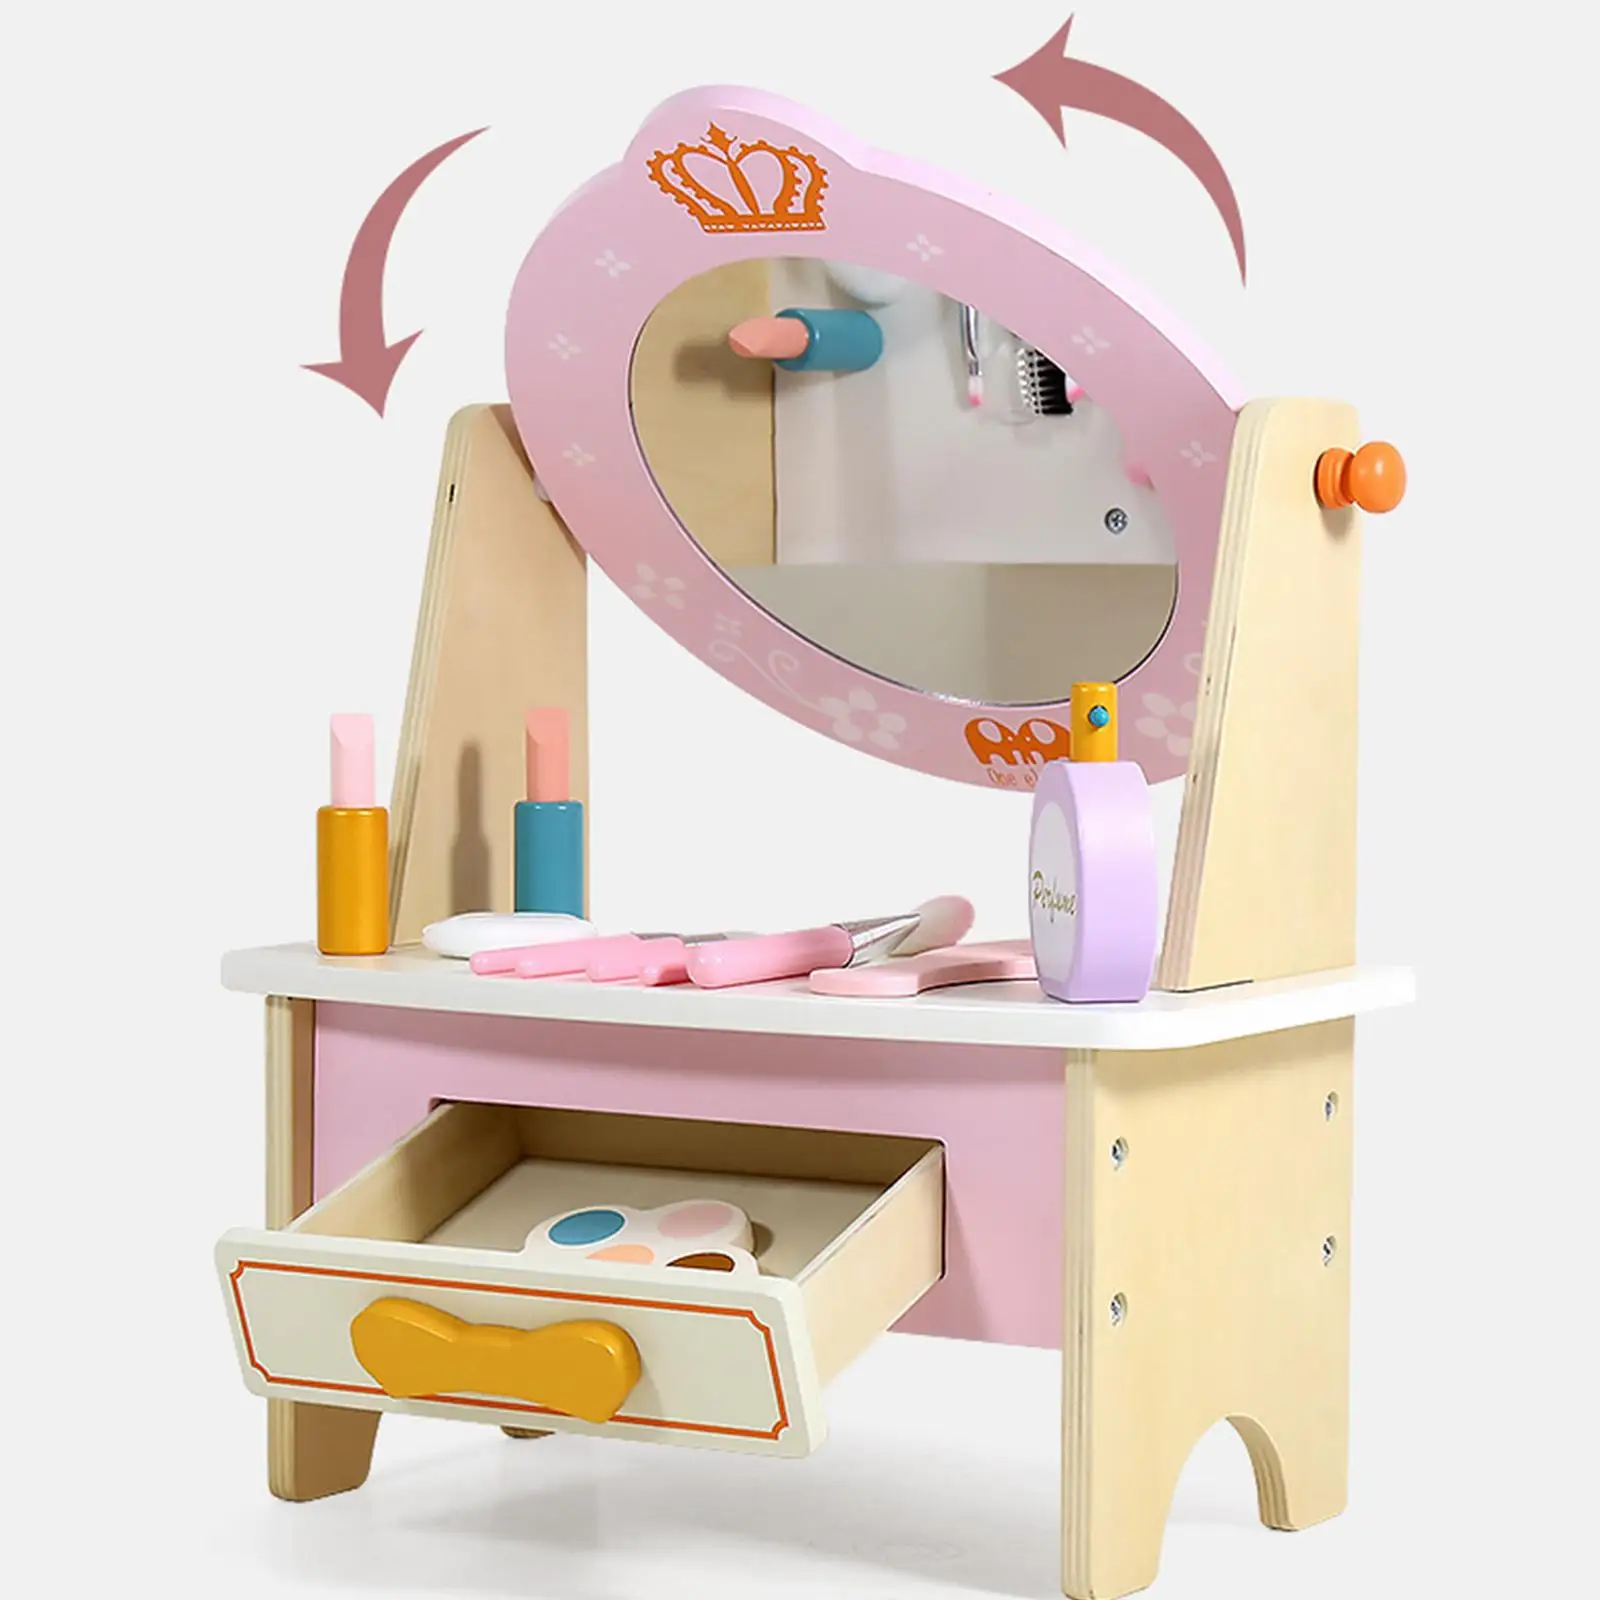 Simulation Makeup Table Toys Role Play Educational Toys Princess Vanity Table with Makeup Accessories for Toddler Birthday Gifts